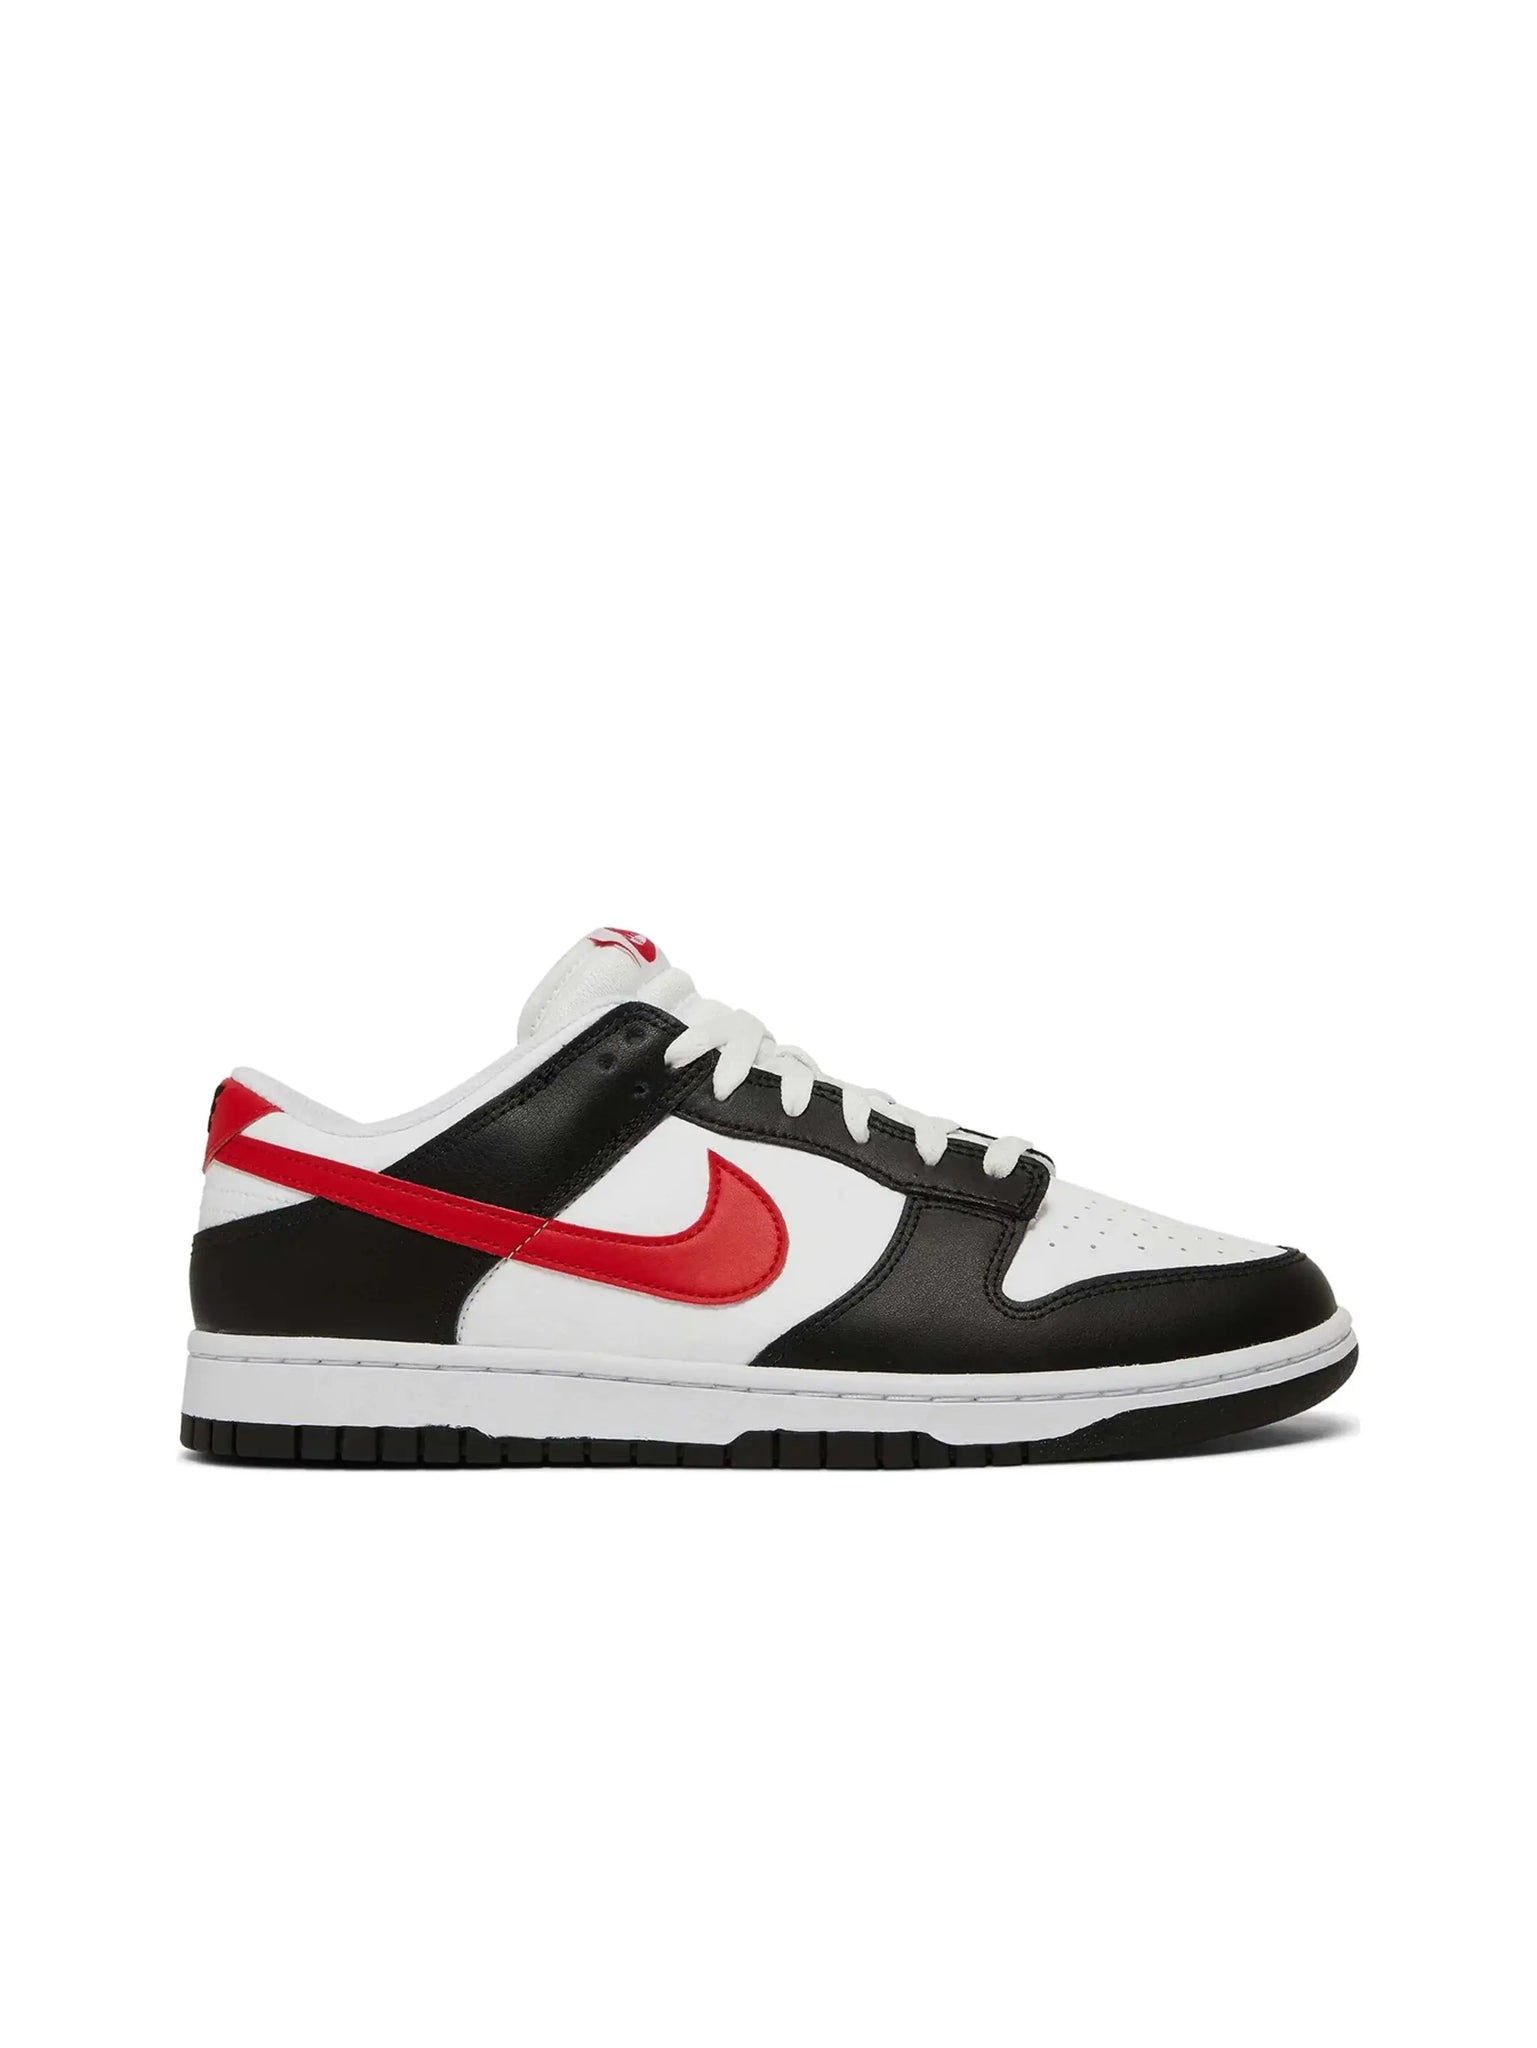 Nike Dunk Low Retro Red Swoosh Panda in Auckland, New Zealand - Shop name